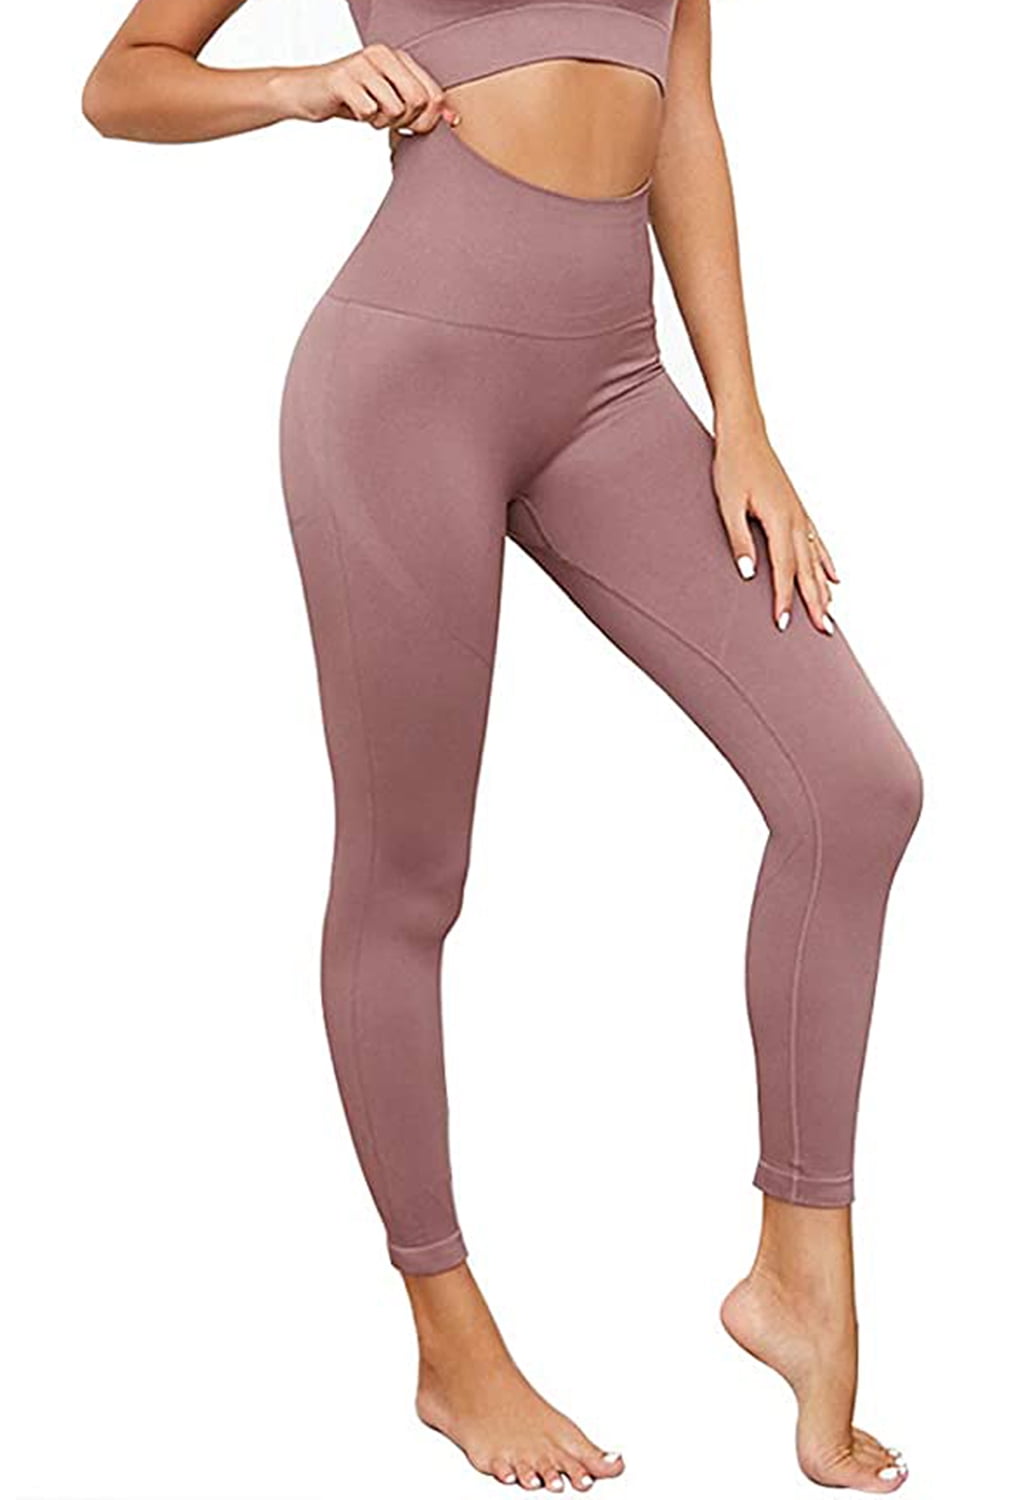 Yoga Pants for Women with Pockets,High Waist Ultra Soft Lightweight Seamless Leggings Yoga Pants Workout Tight 